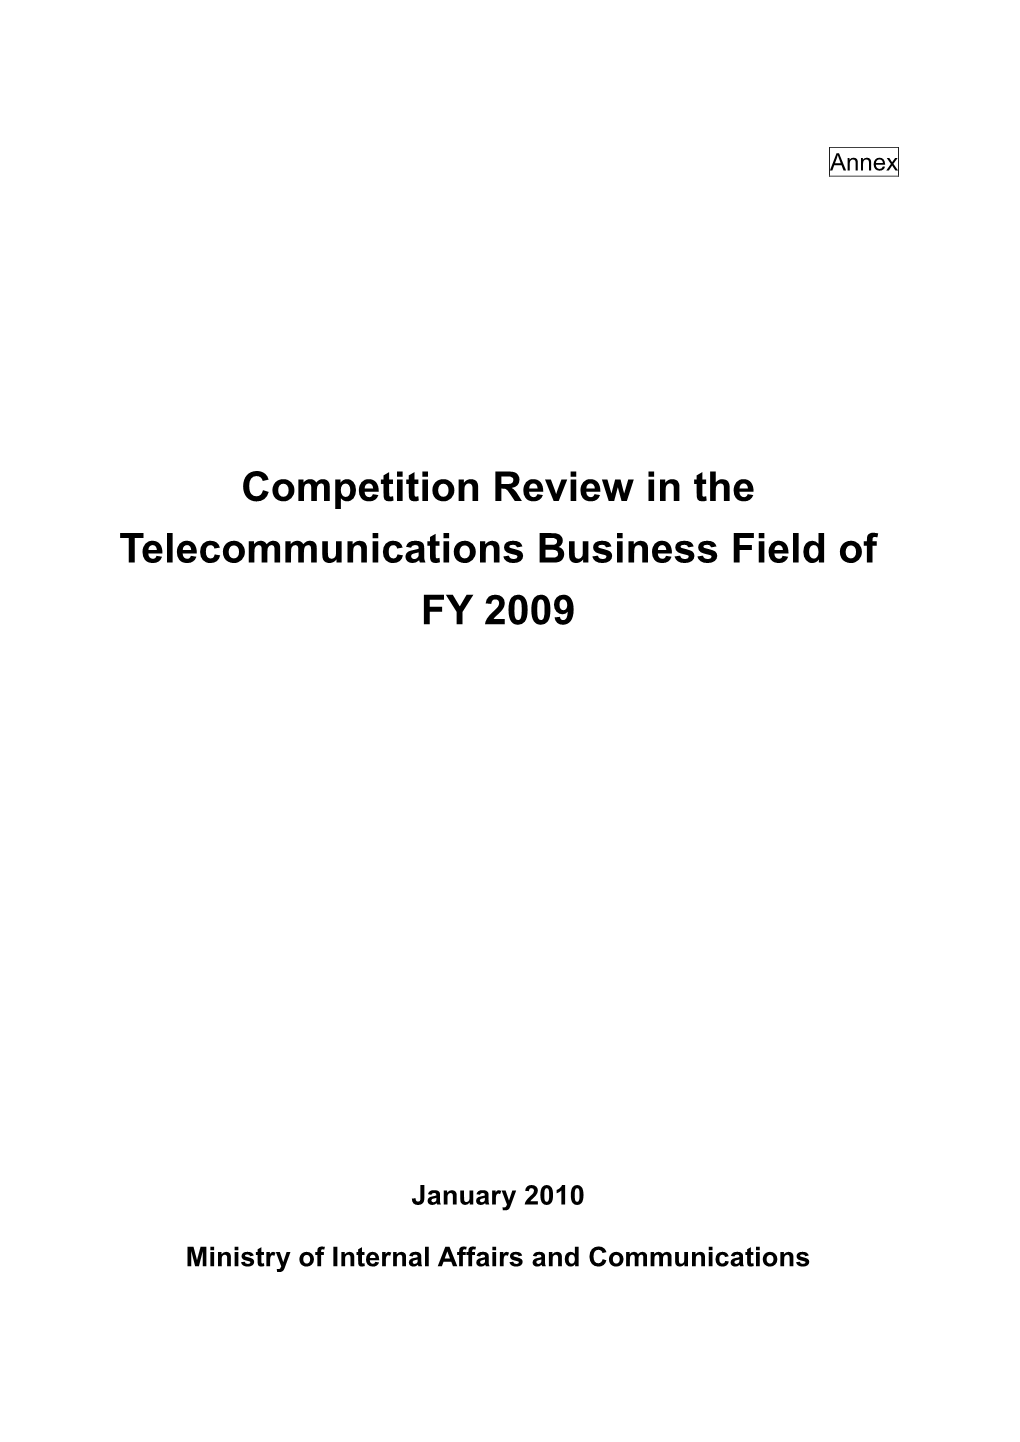 Competition Review in the Telecommunications Business Field of FY 2009